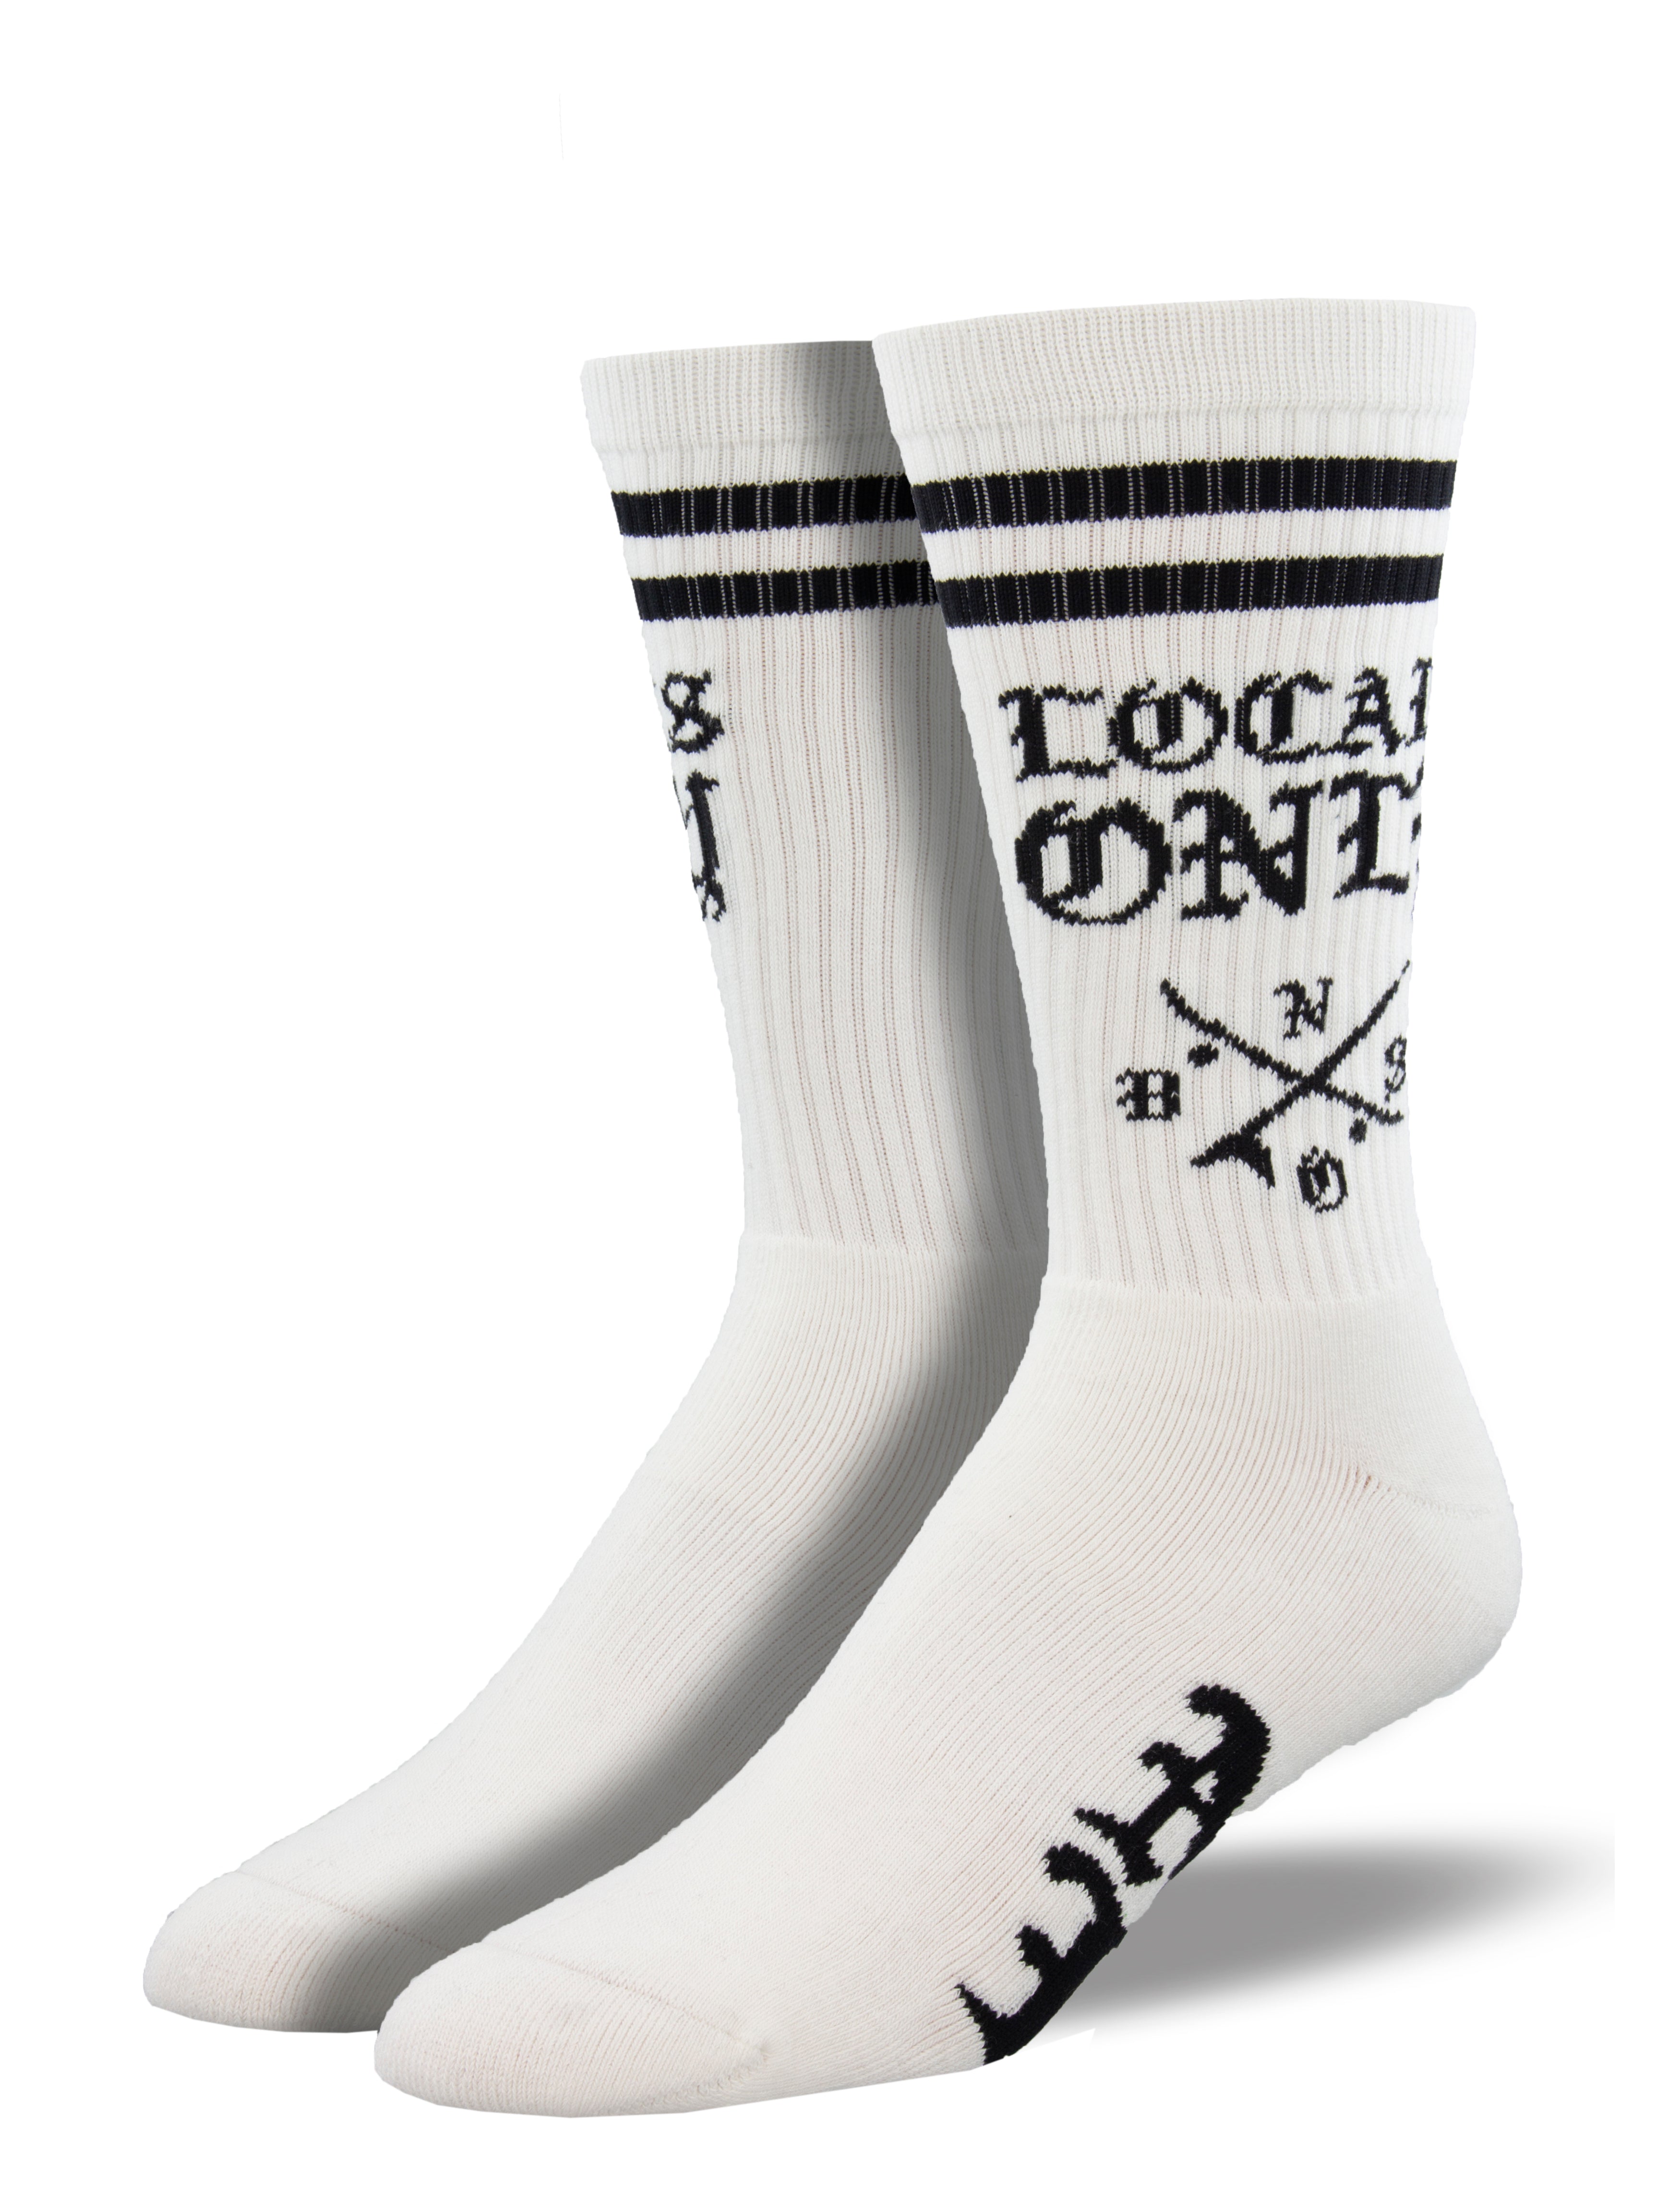 NO BS - "Locals Only" Athletic Socks